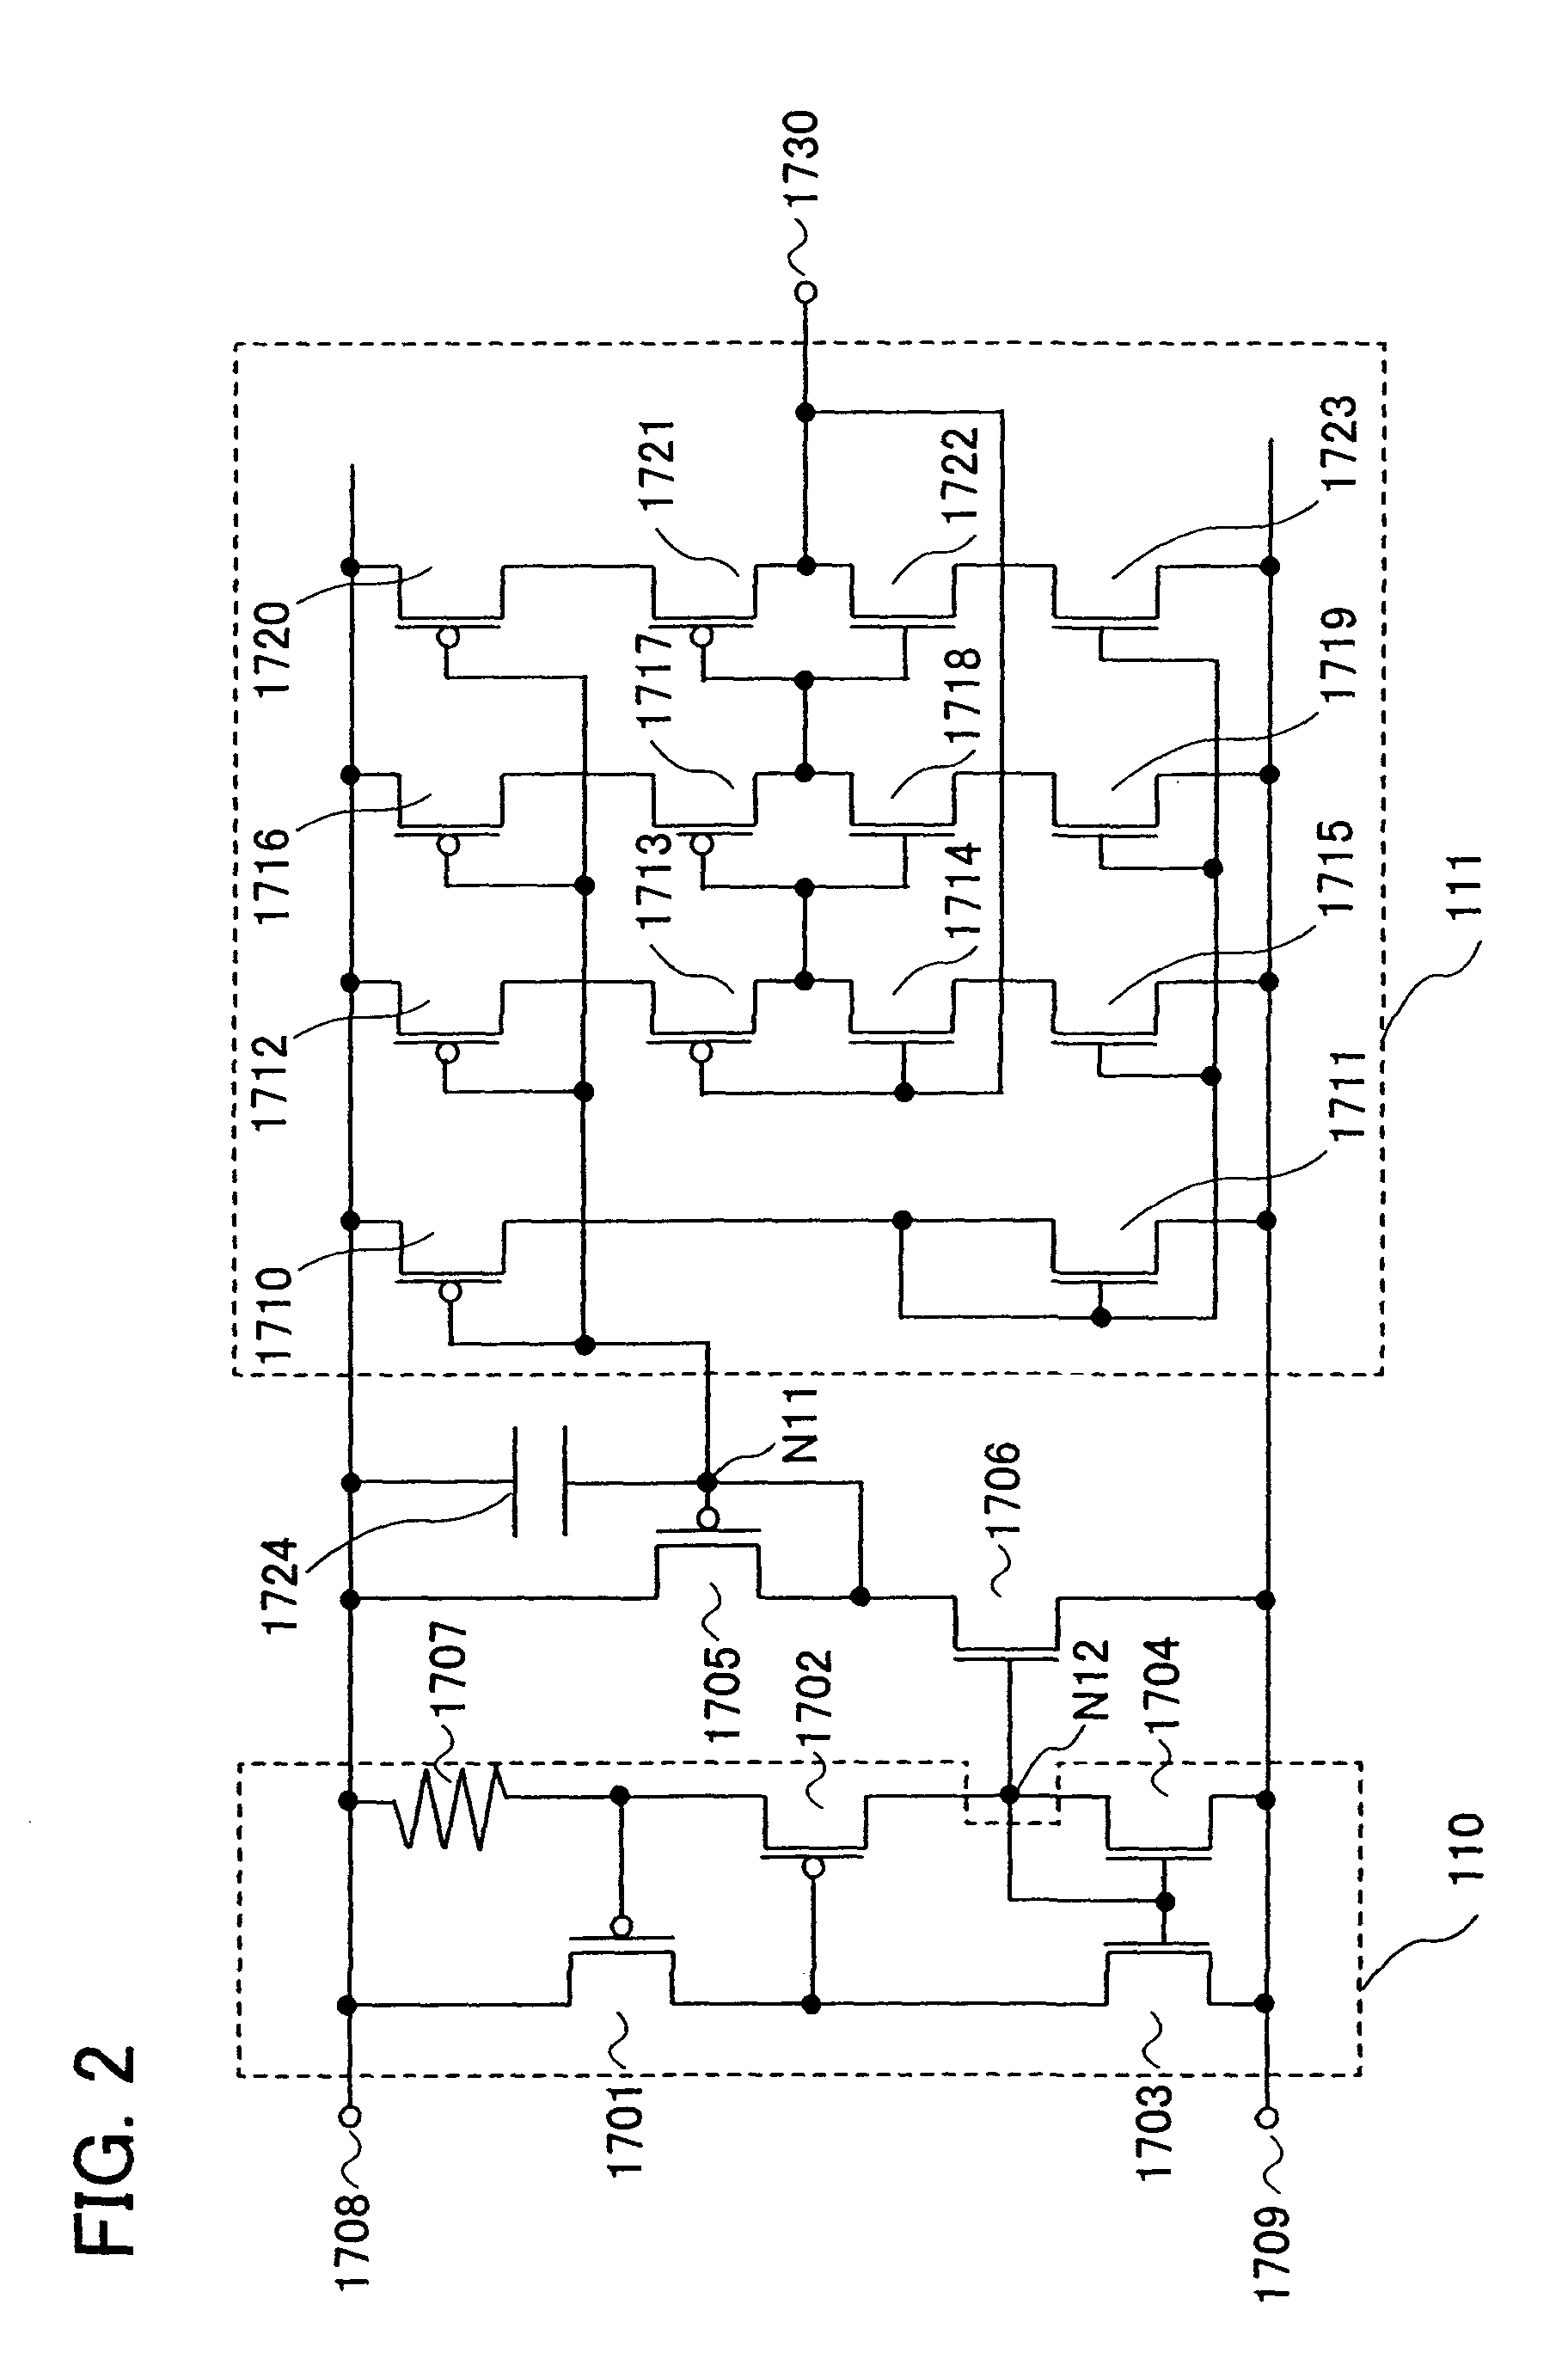 Oscillator circuit having a stable output signal resistant to power supply voltage fluctuation